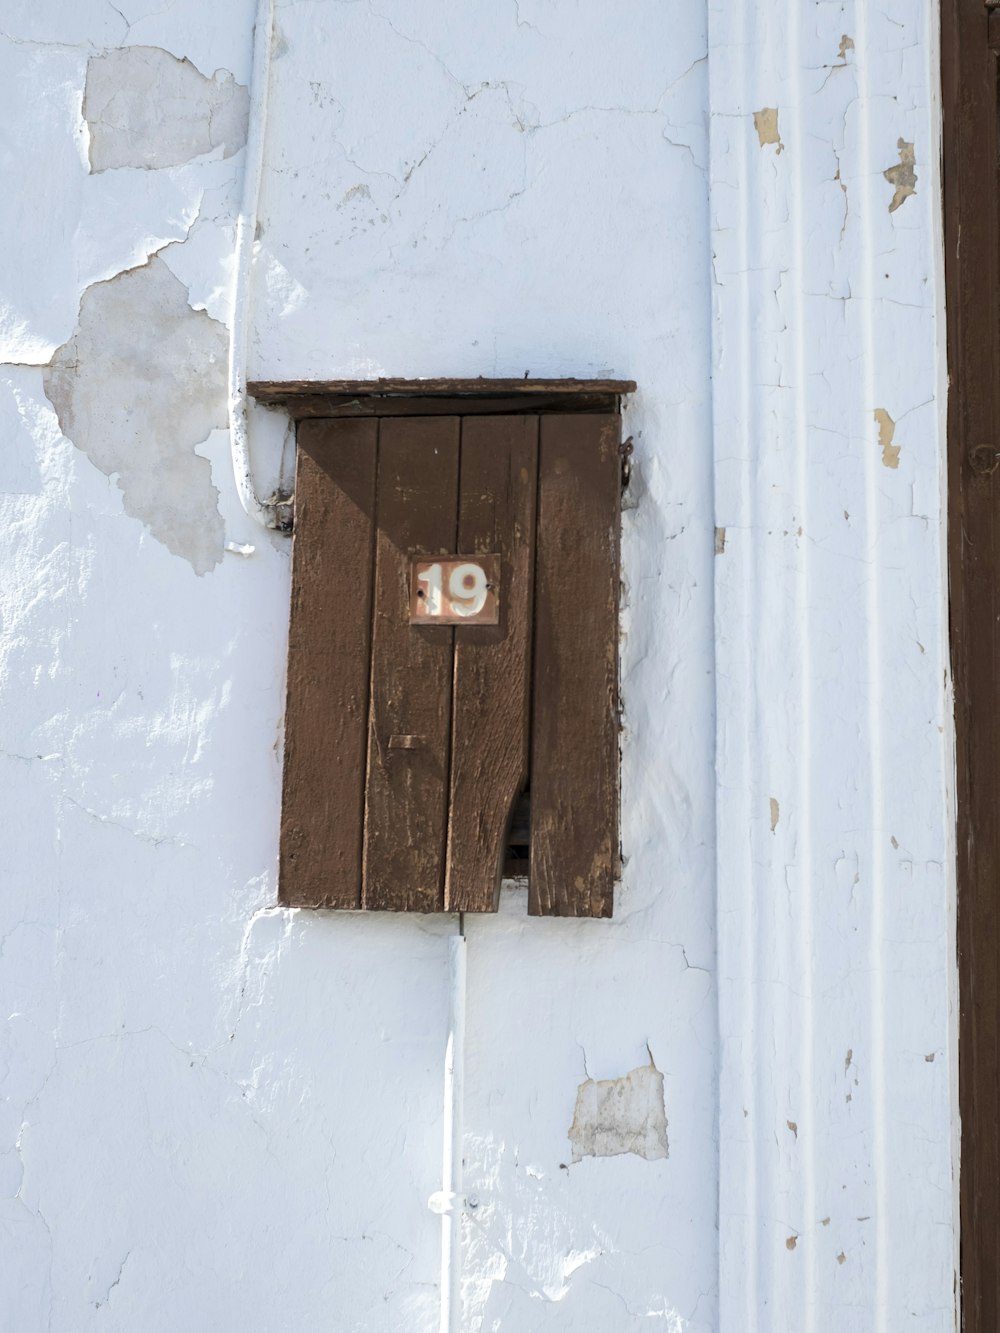 a wooden window with a number on it